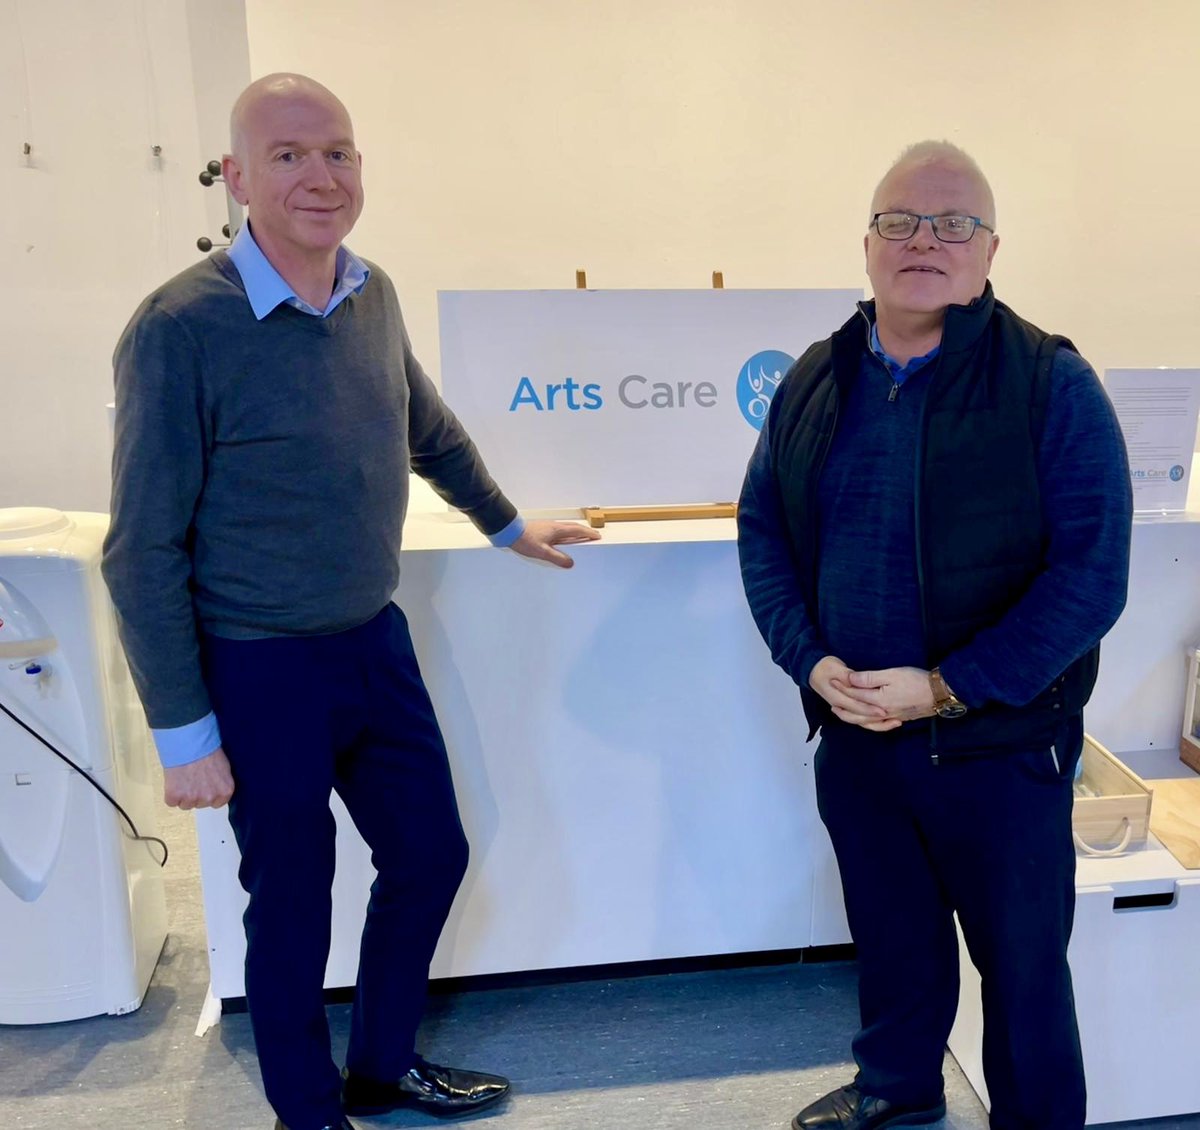 Barry meets Barry! Our CEO Barry Macaulay hosted his namesake Barry Smyth Area Manager @AlzSocNI at our Creative Space this week. The 2 organisations have exciting partnership plans to bring participation in the Arts, with all its benefits, to people living with Dementia.